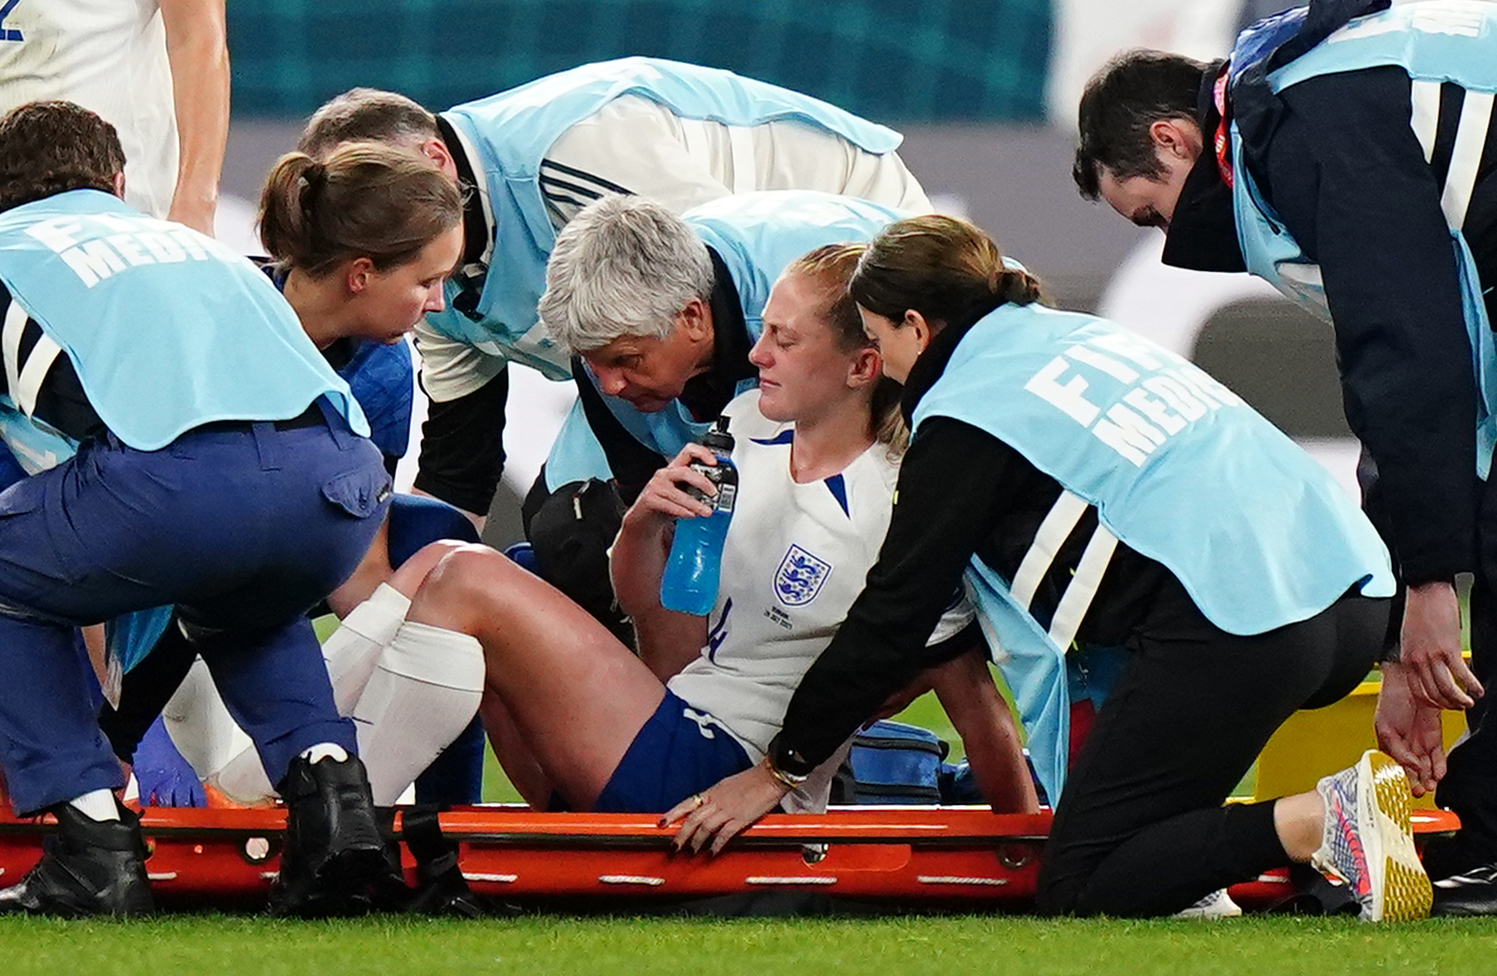 England’s Keira Walsh has remained in Australia after sustaining a knee injury against Denmark